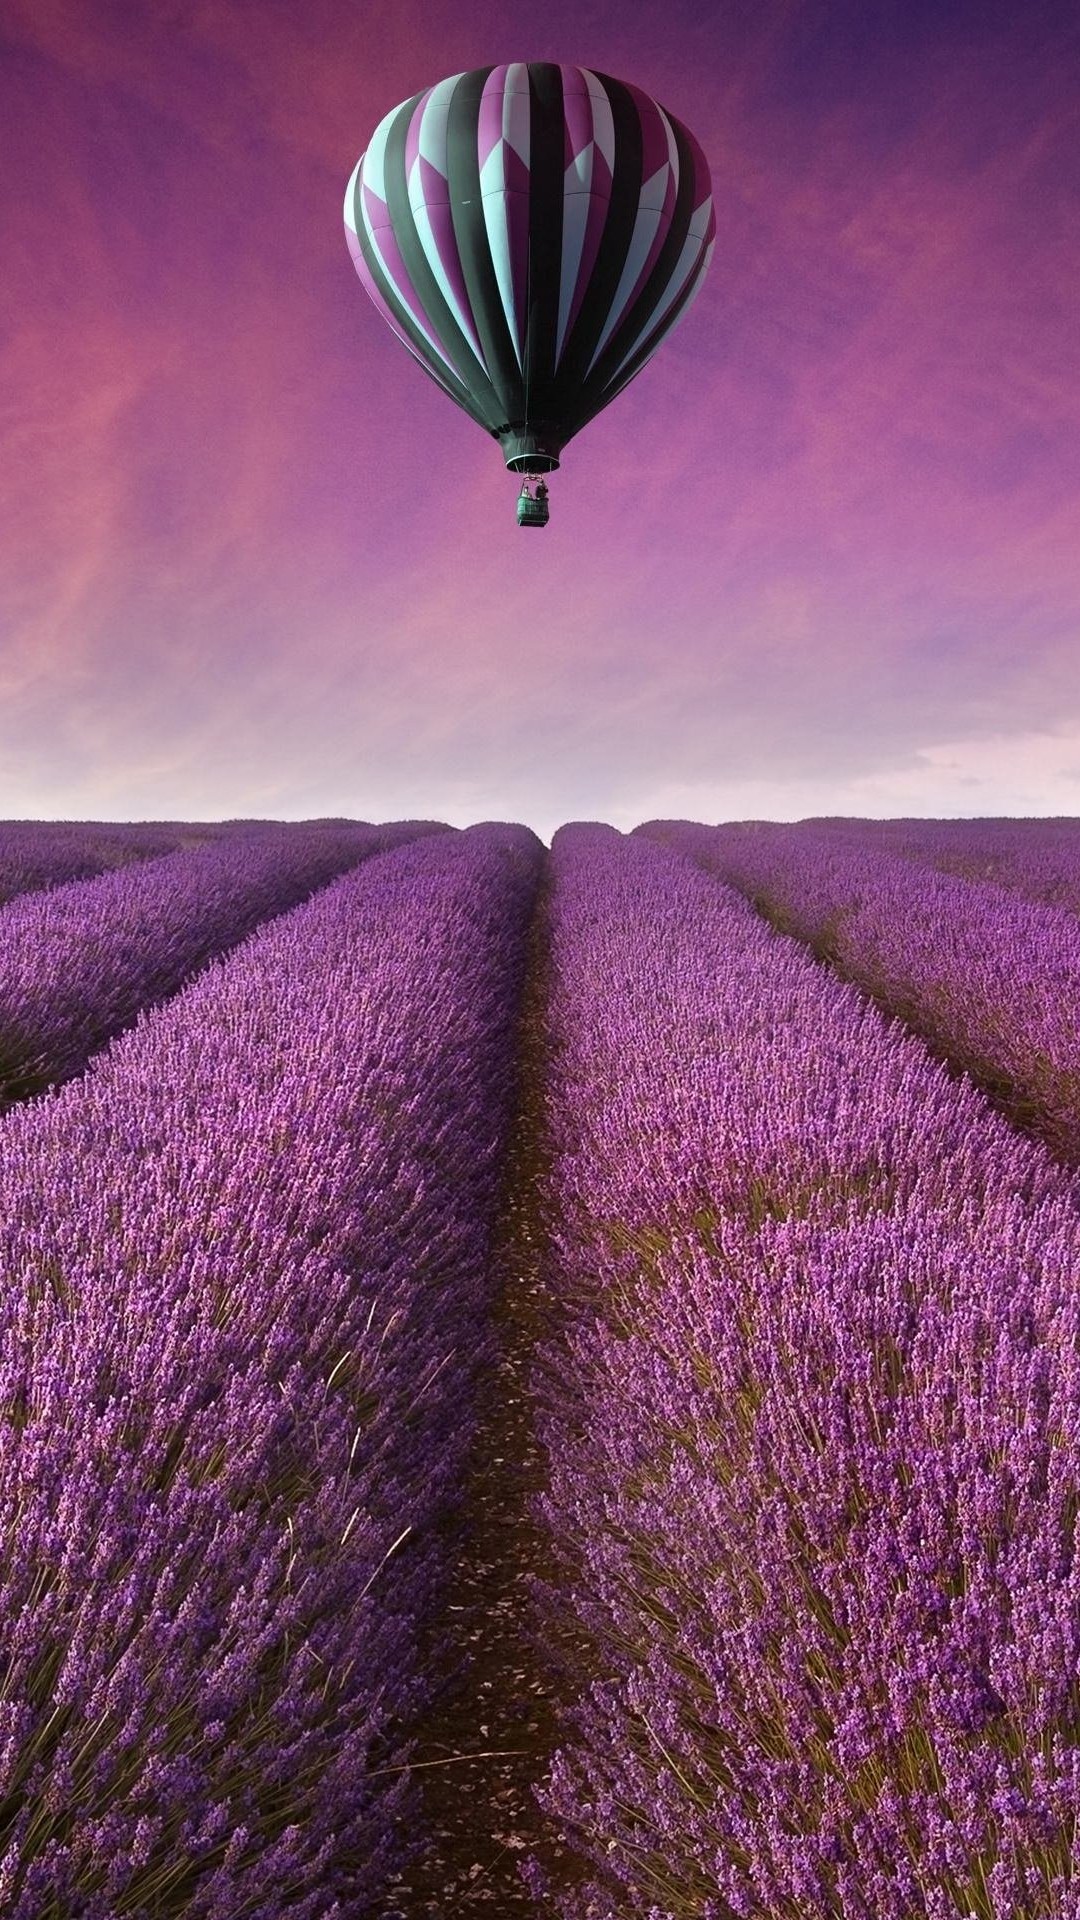 Hot Air Balloon Over Lavender Field Wallpaper for SONY Xperia Z2